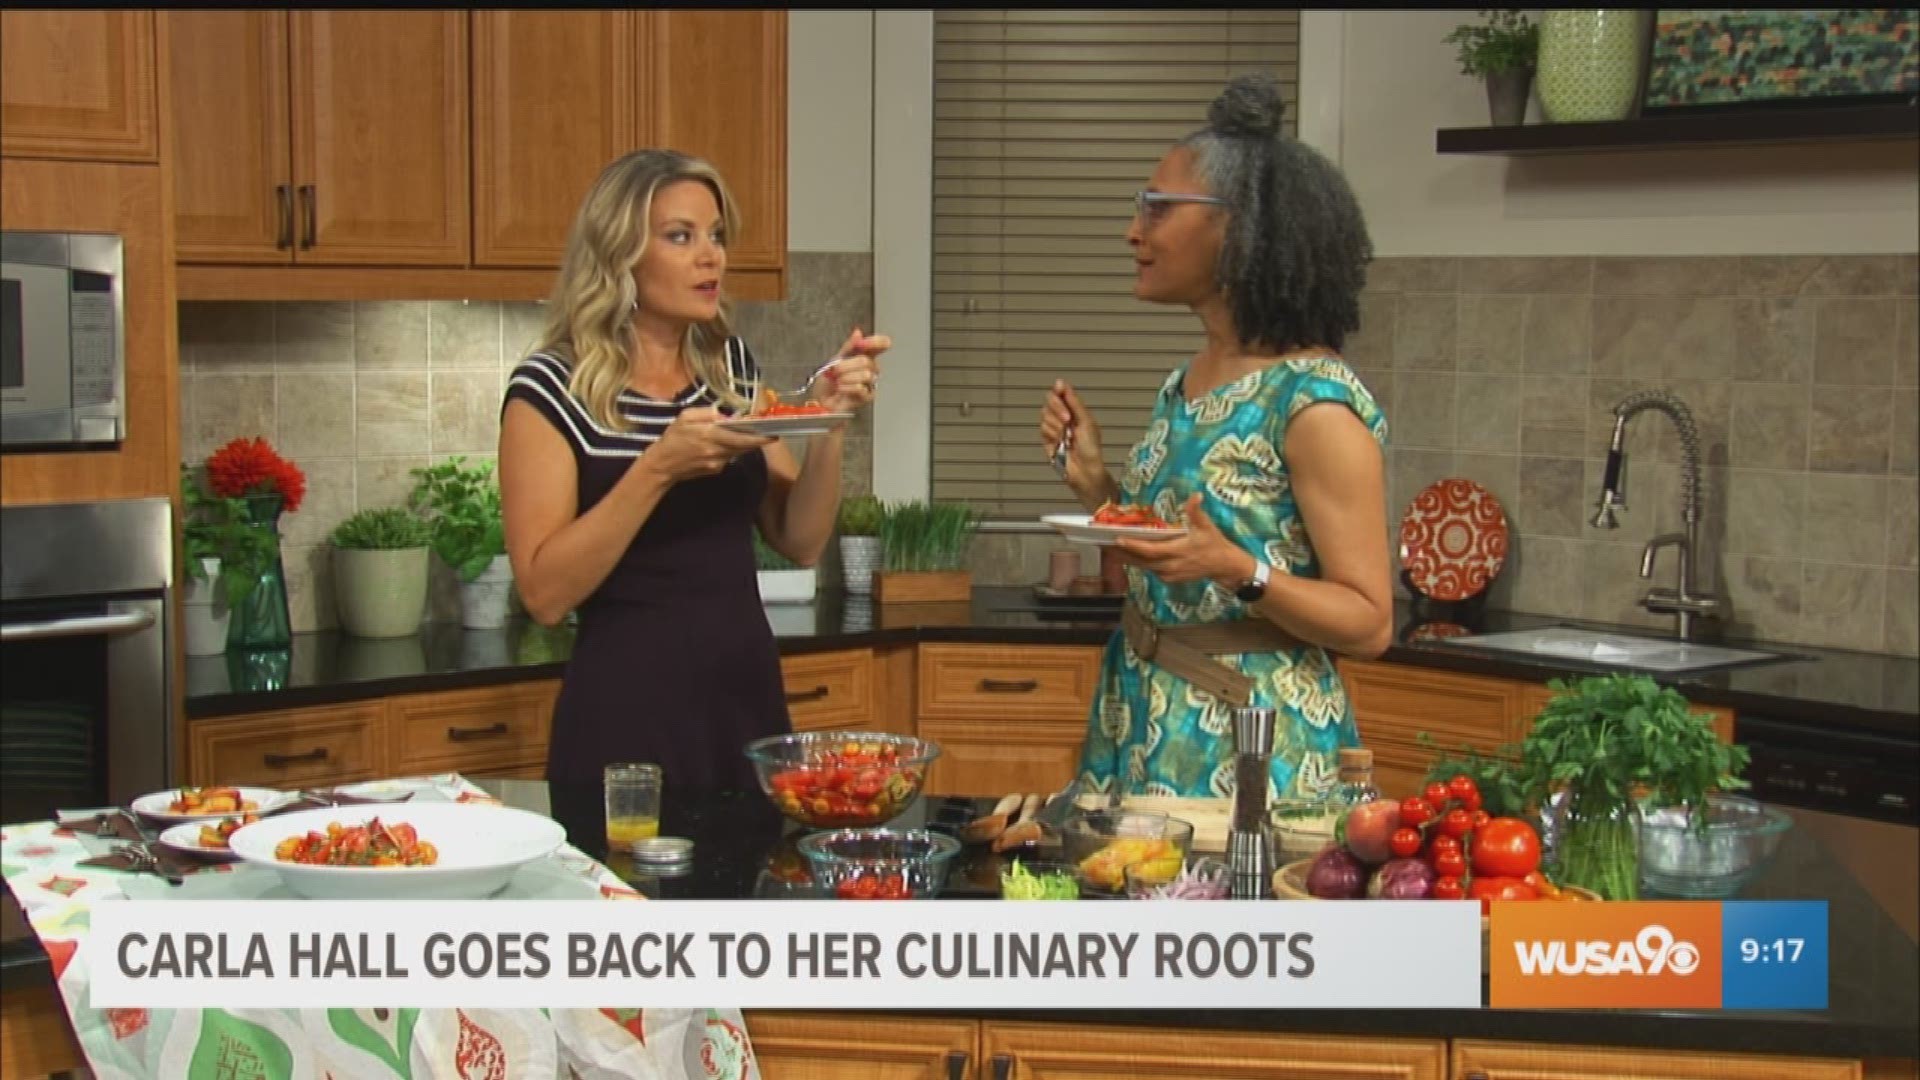 Celebrity chef, cookbook author and TV personality Carla Hall is back in the Great Day kitchen whipping up an amazing summer salad. She also tells us her favorite things about summer are the fresh fruit and enjoying the great outdoors!